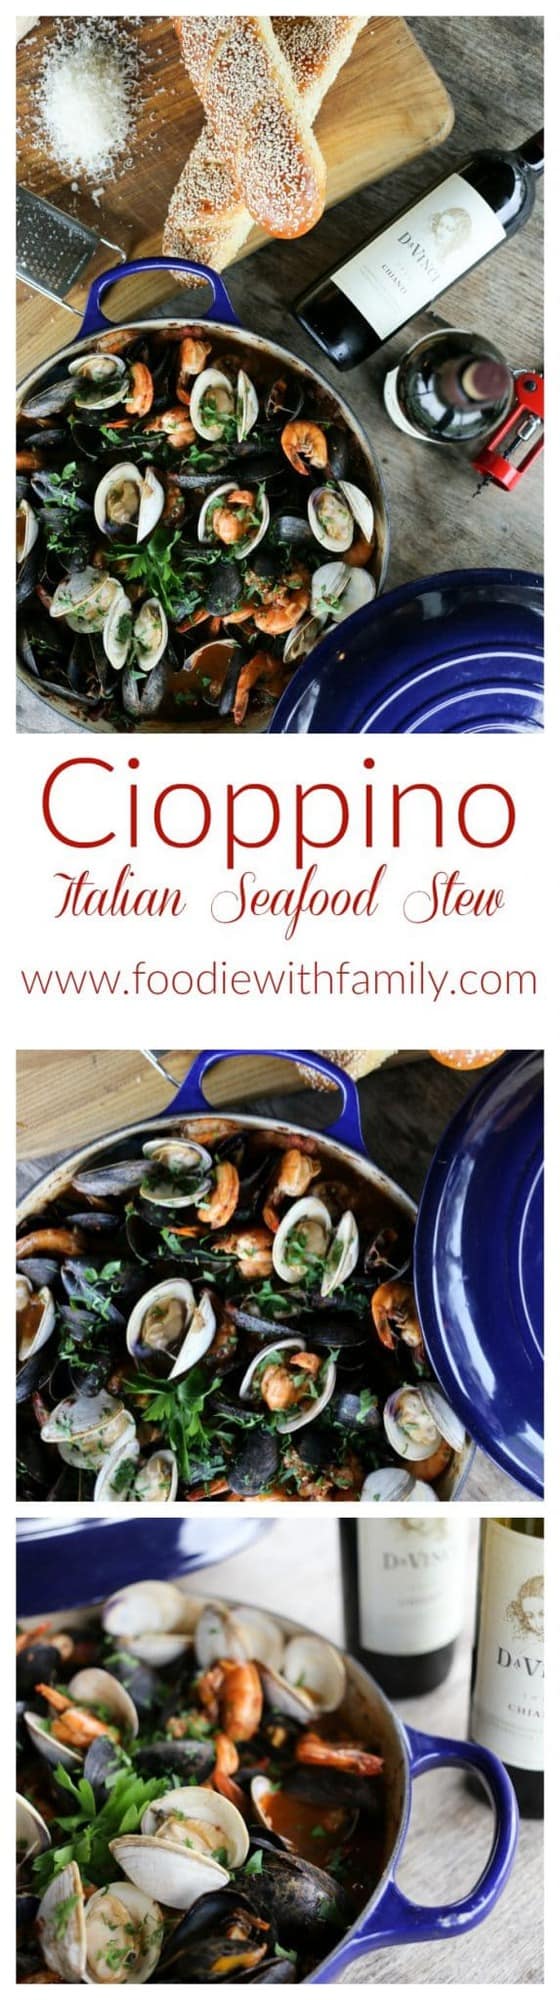 It had humble beginnings as a fisherman's stew, but this gorgeous Cioppino or Italian Seafood Stew is now a showstopper of a main dish. Serve on its own or as part of your Feast of the Seven Fishes. #sponsored